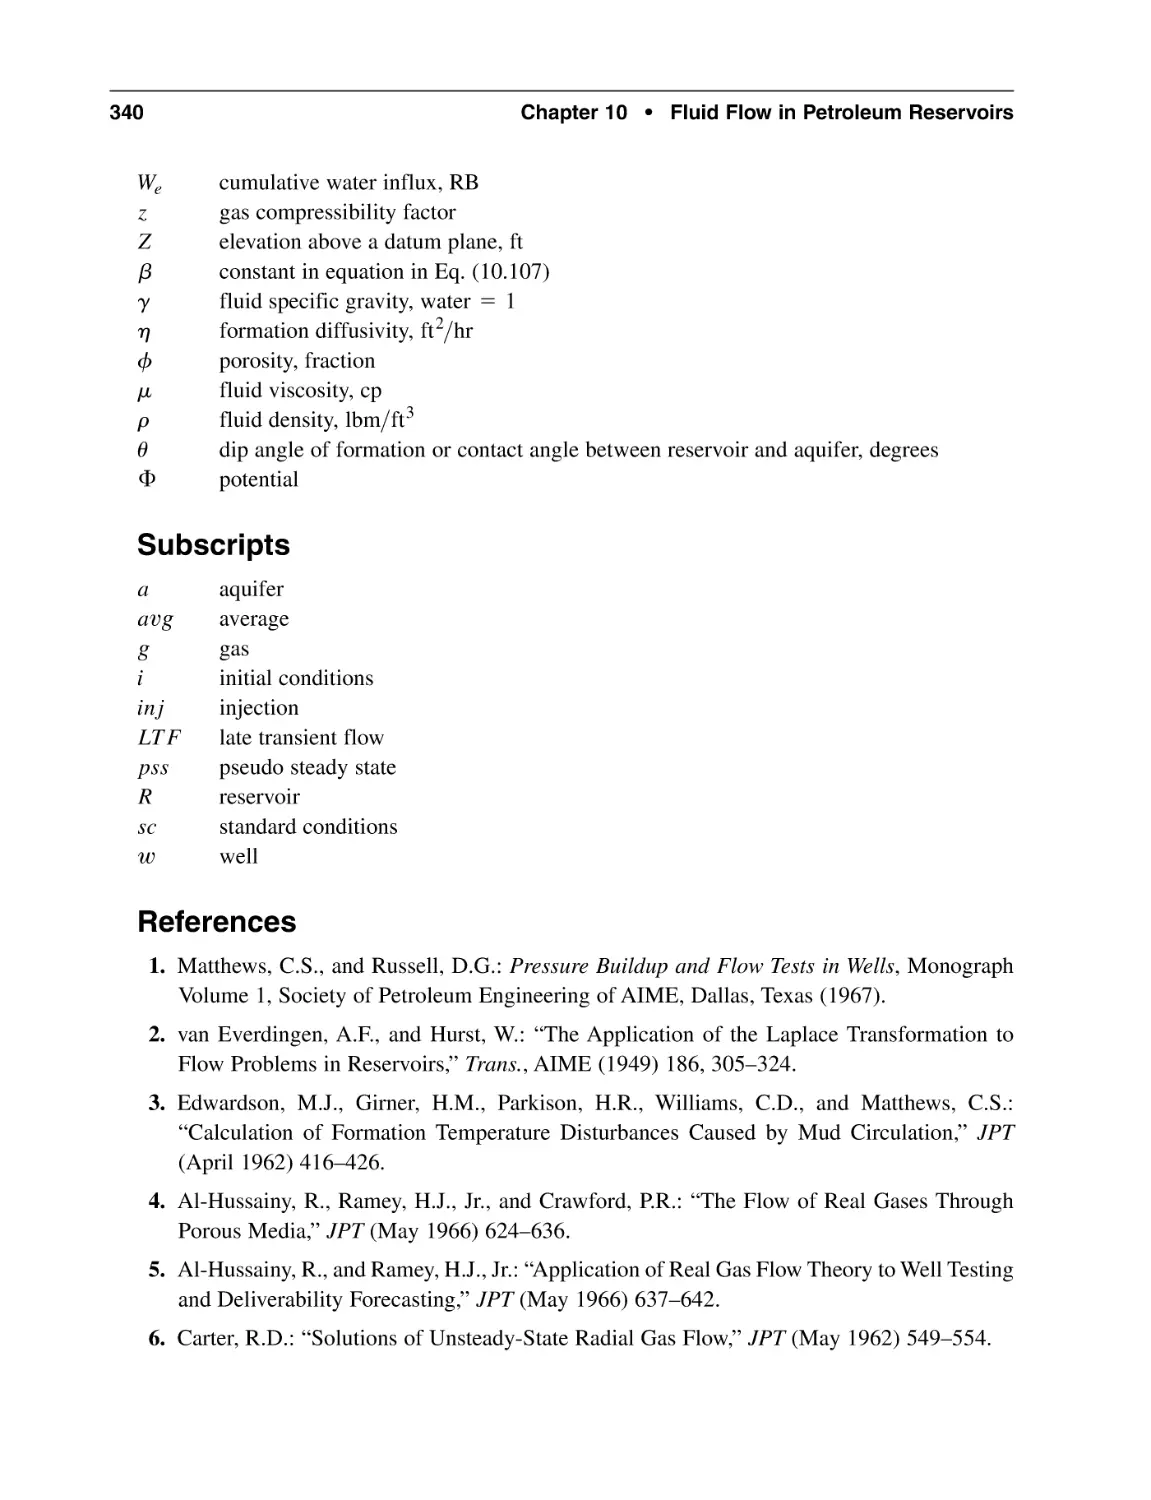 Subscripts
References